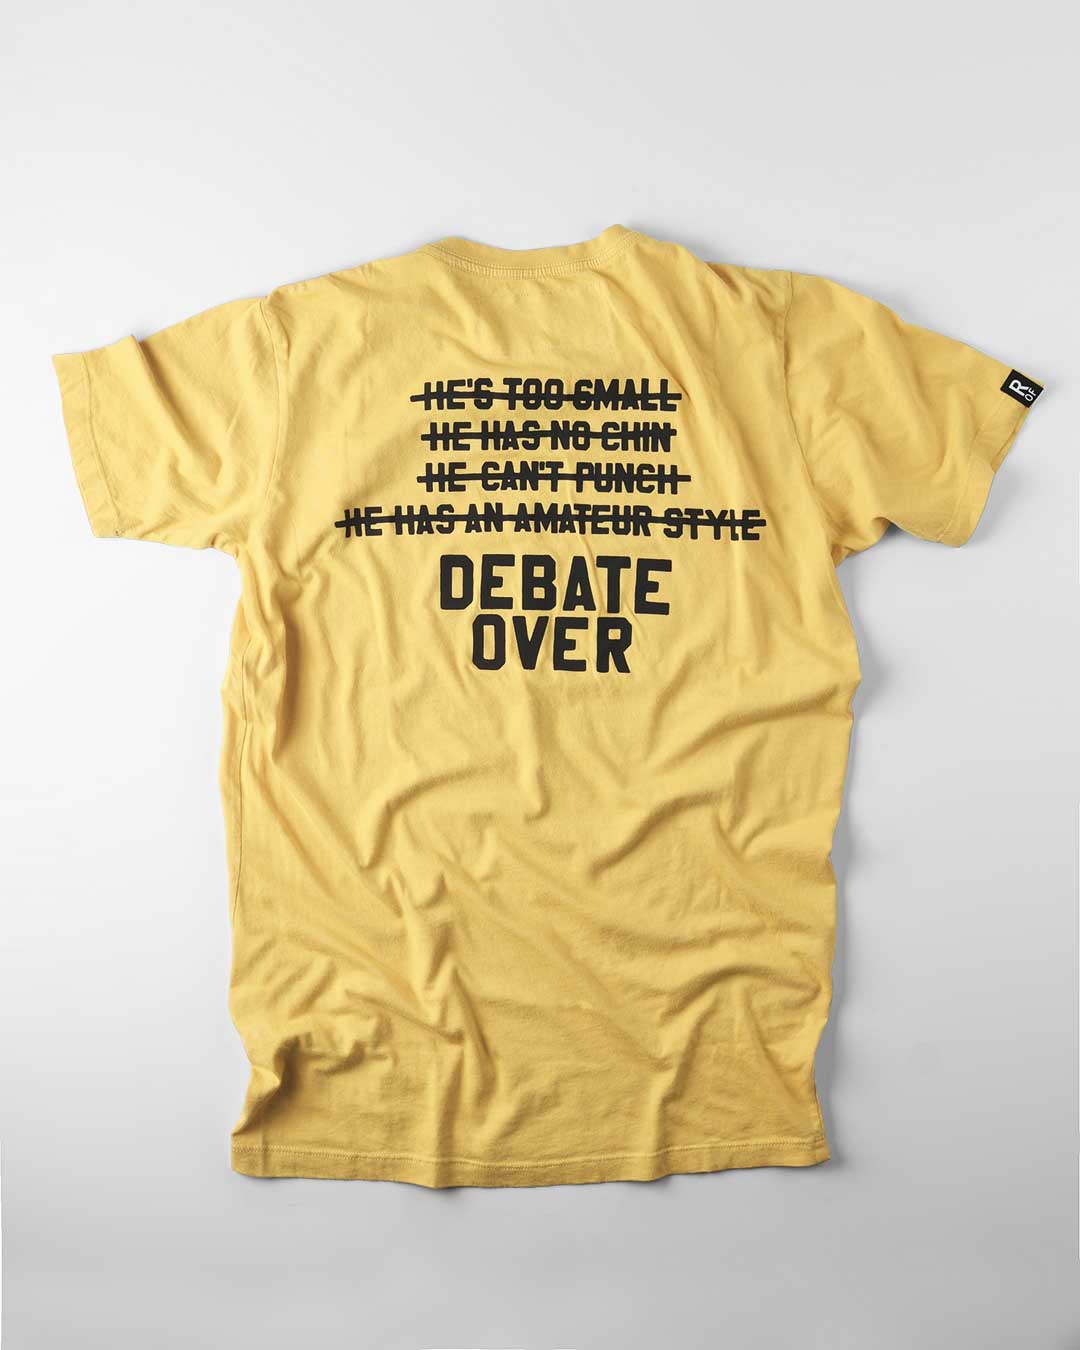 Andre Ward H.O.F. Yellow Tee - Roots of Fight